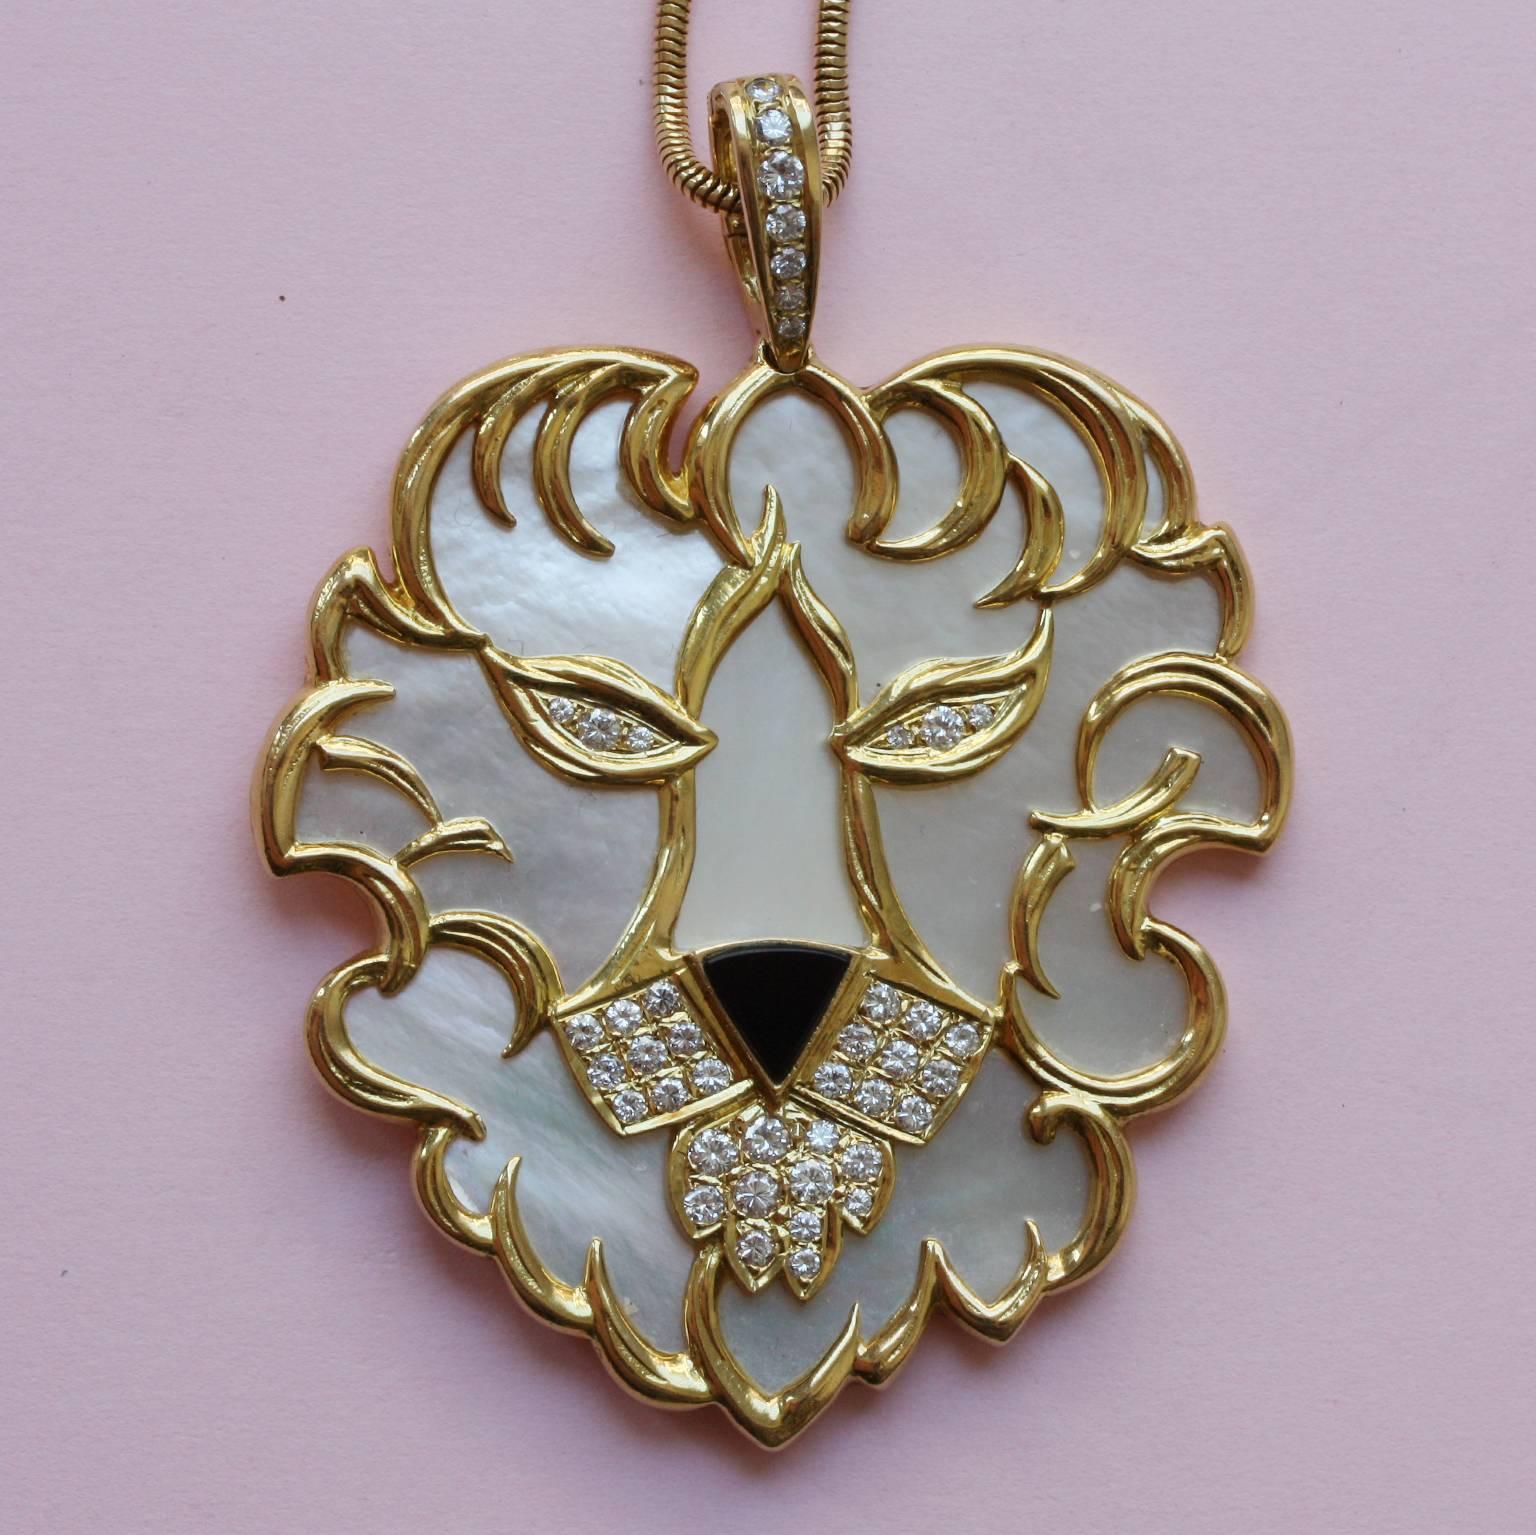 A large lion pendant of mother of pearl asymmetrical set in textured gold for the fur, with an onyx nose and brilliant cut diamonds for eyes and whiskers and beard (app. 1.6 carats) and also in the hoop of the pendant, with French masters mark and